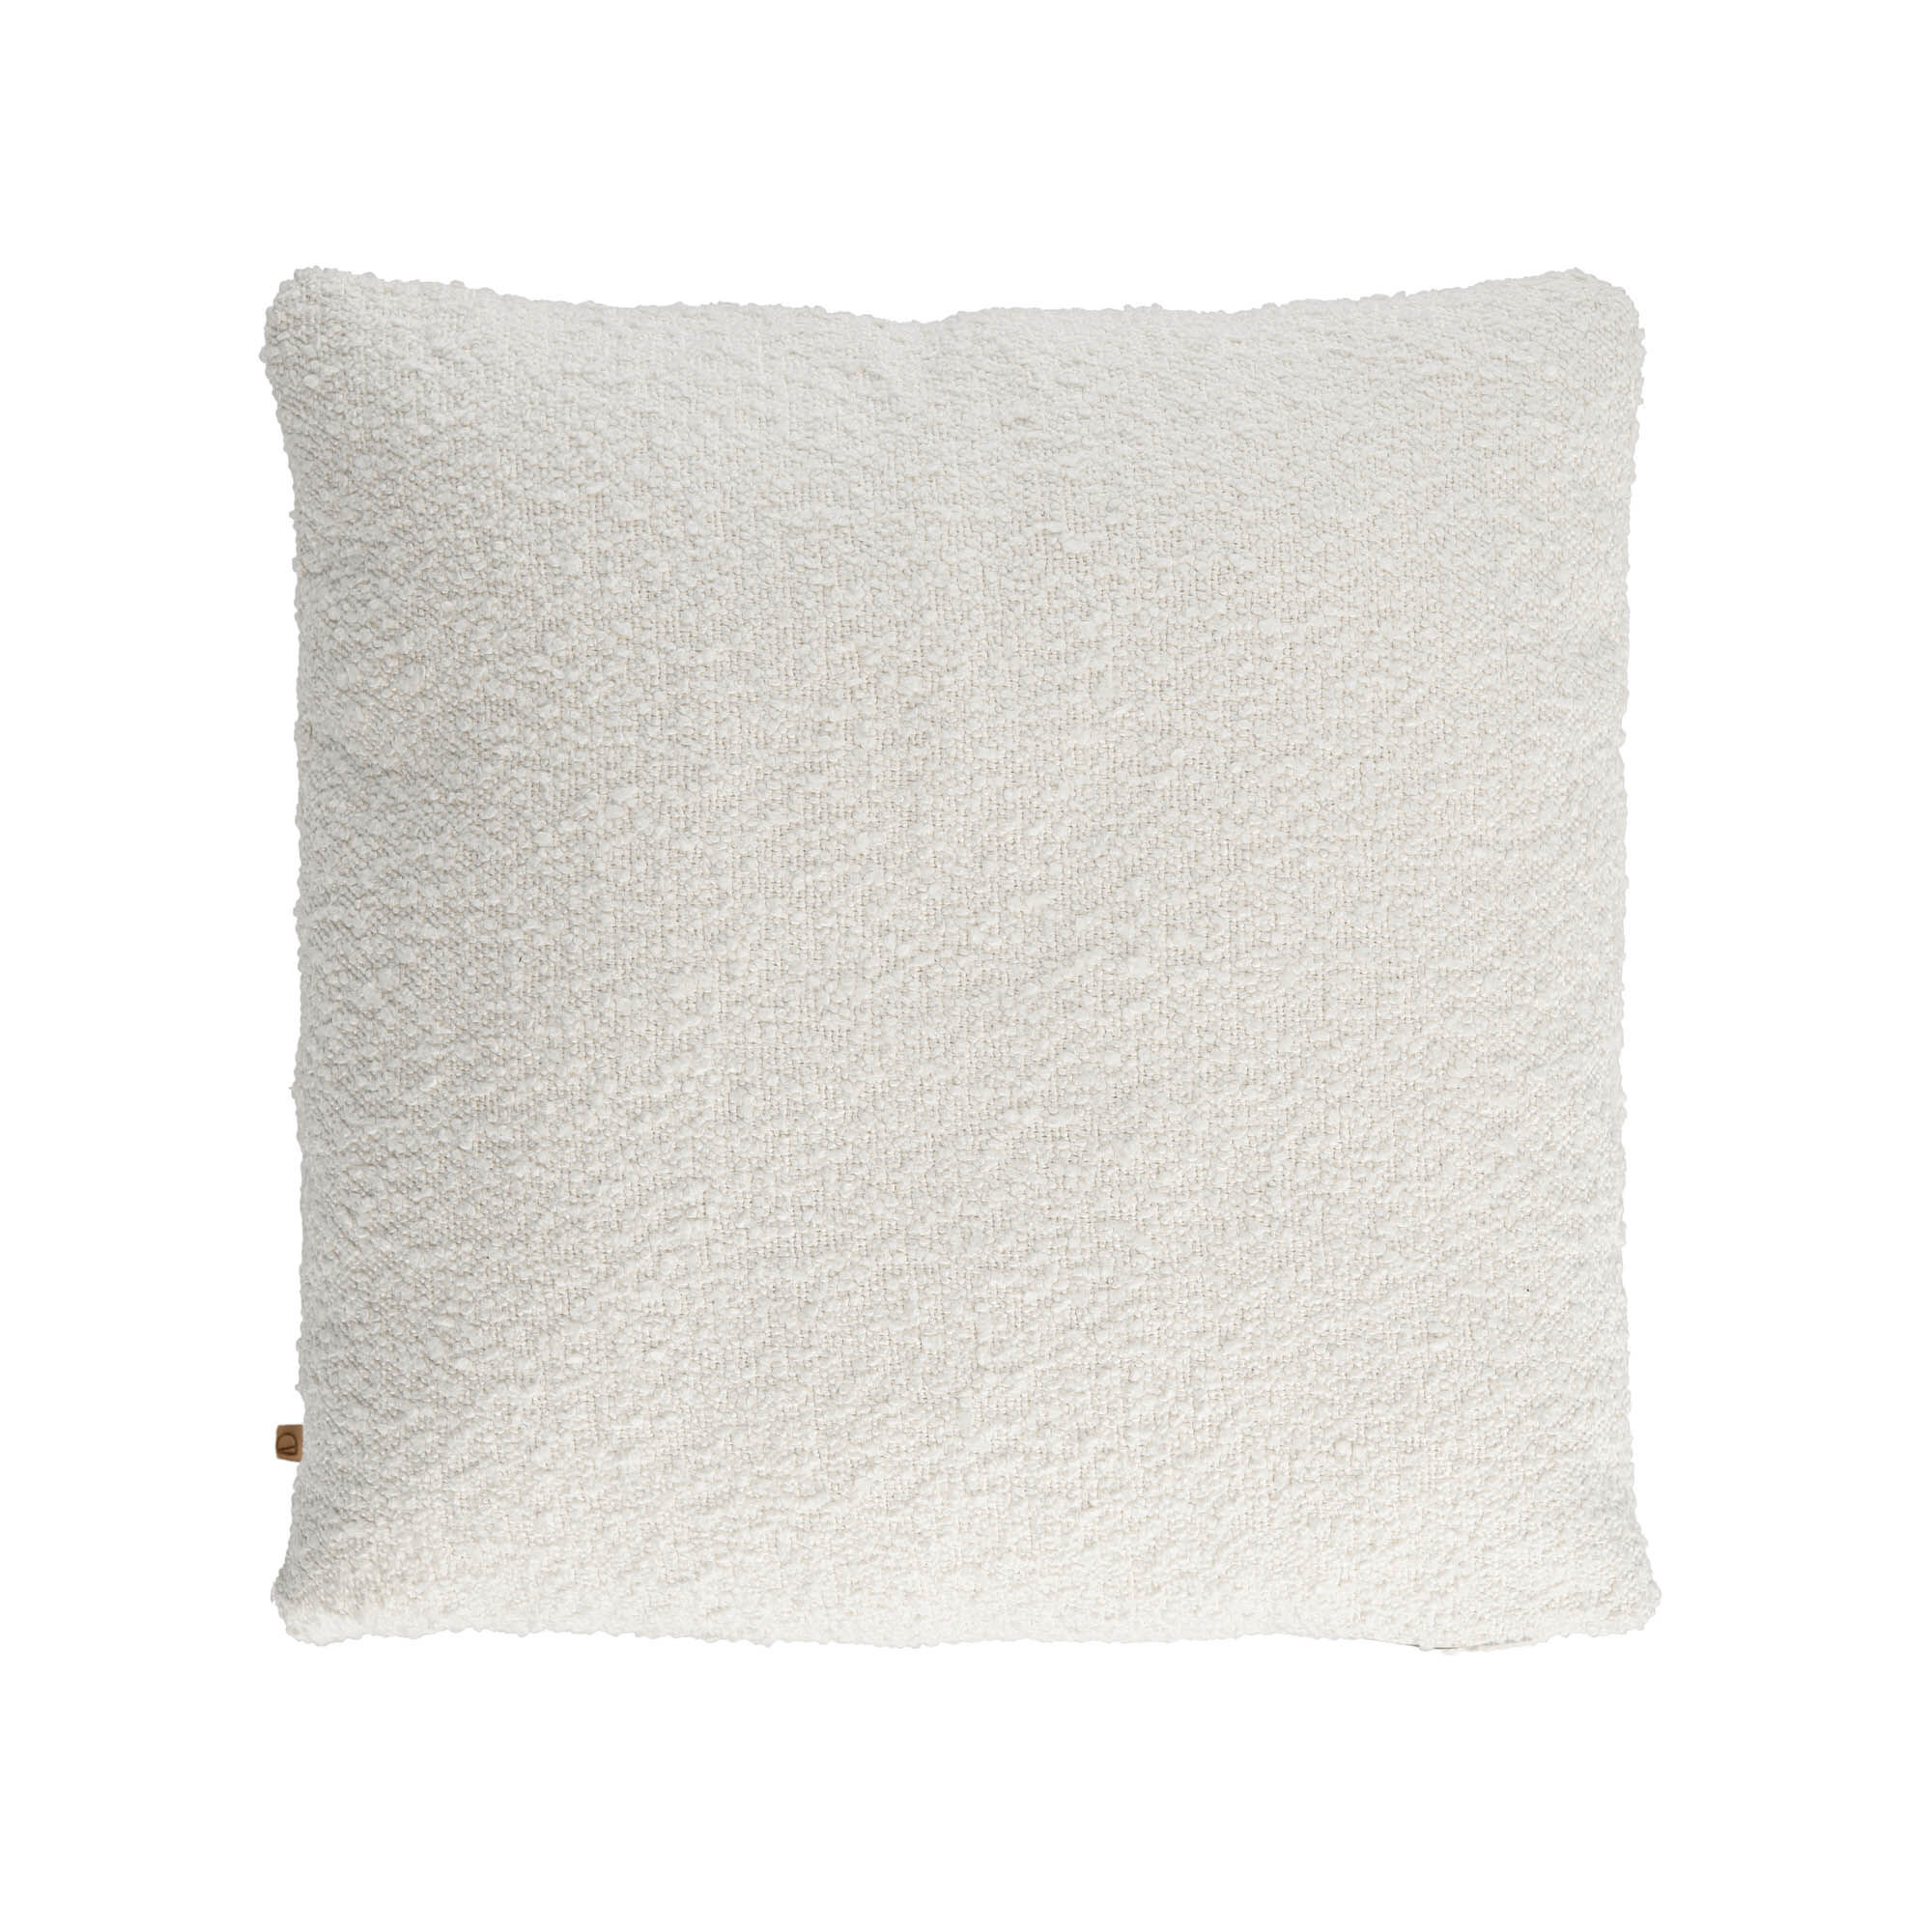 Kave Home Vicka white cushion cover 60 x 60 cm